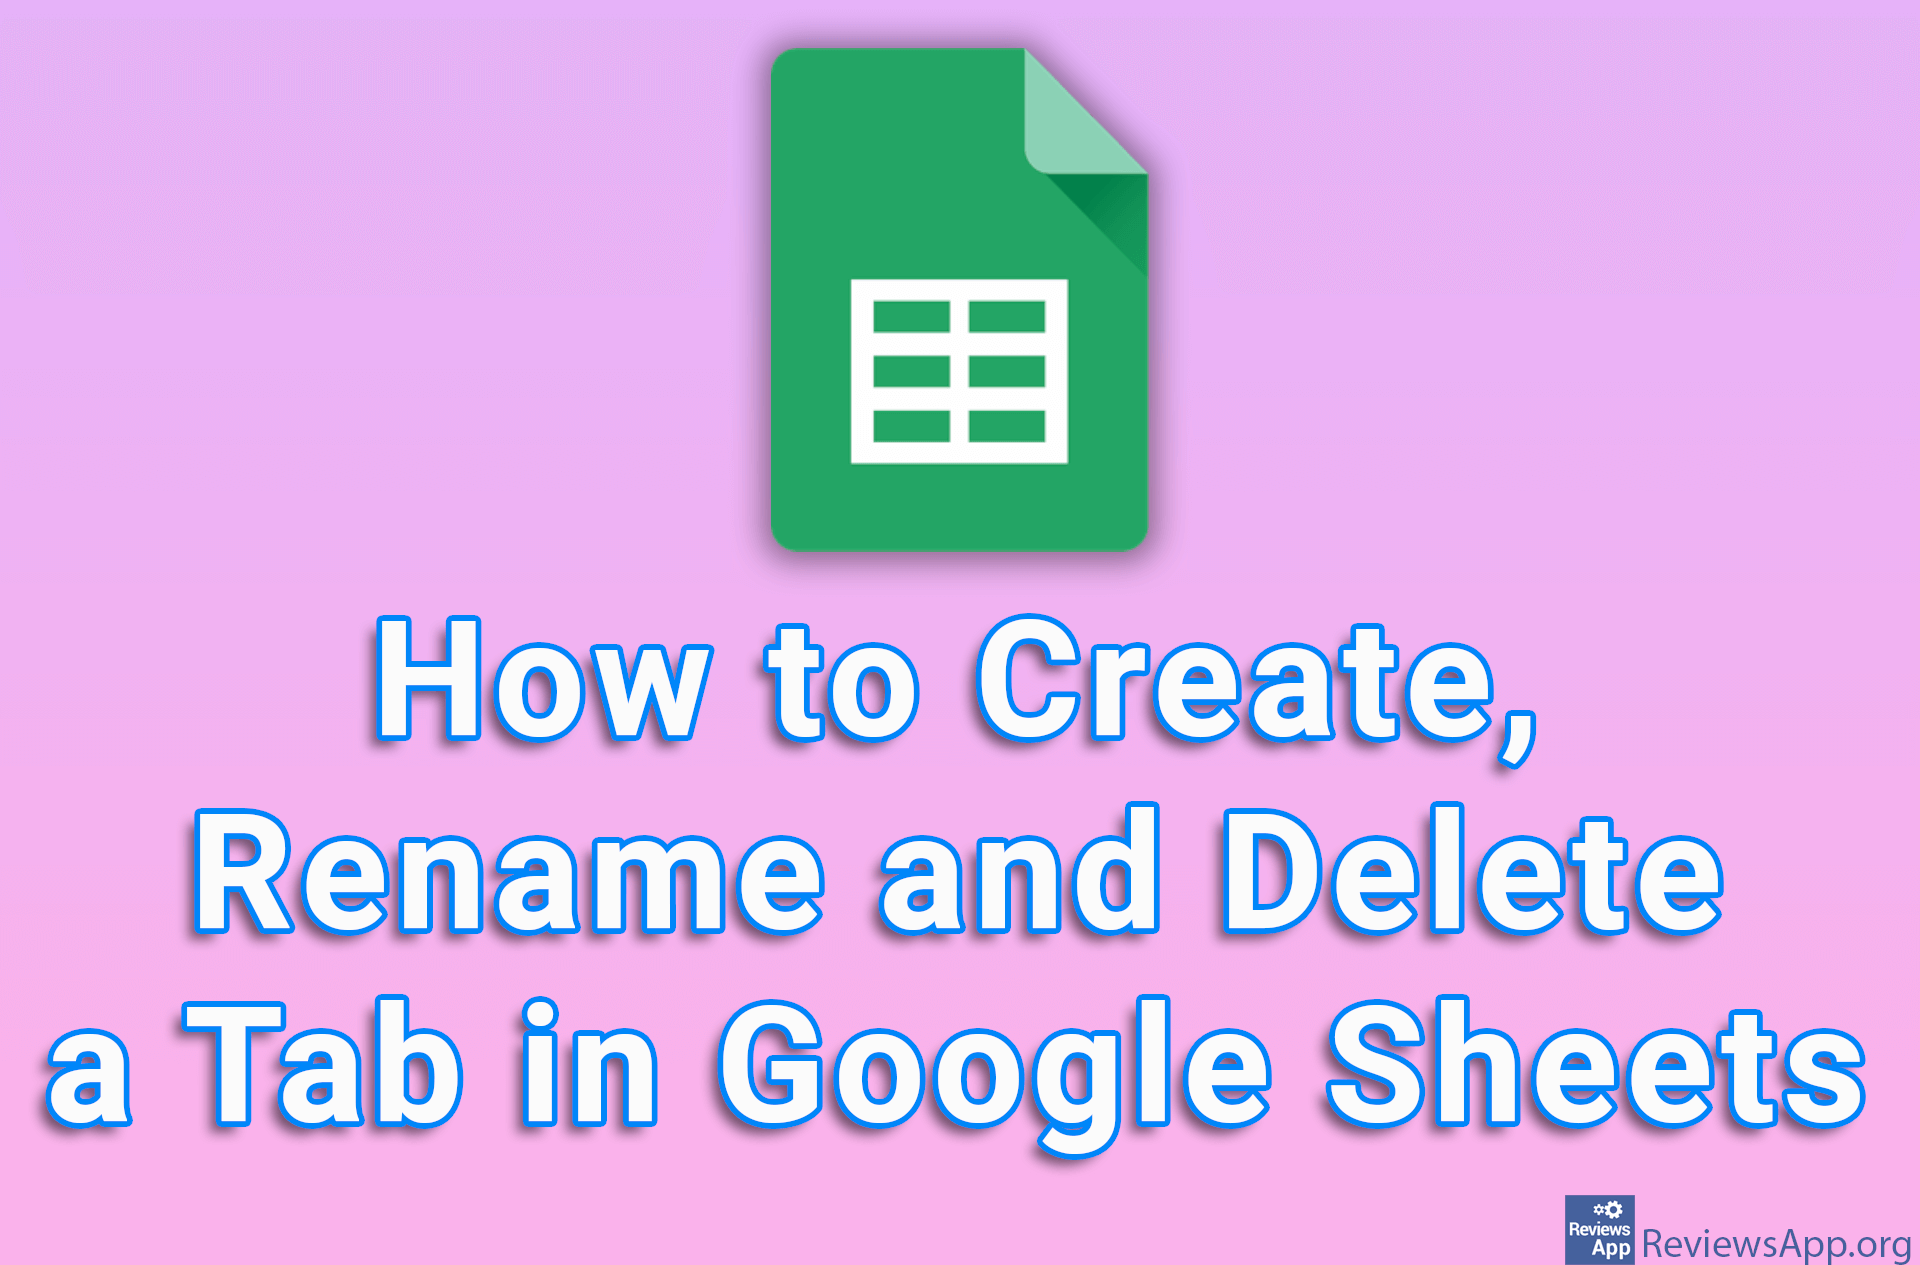 How to Create, Rename and Delete a Tab in Google Sheets